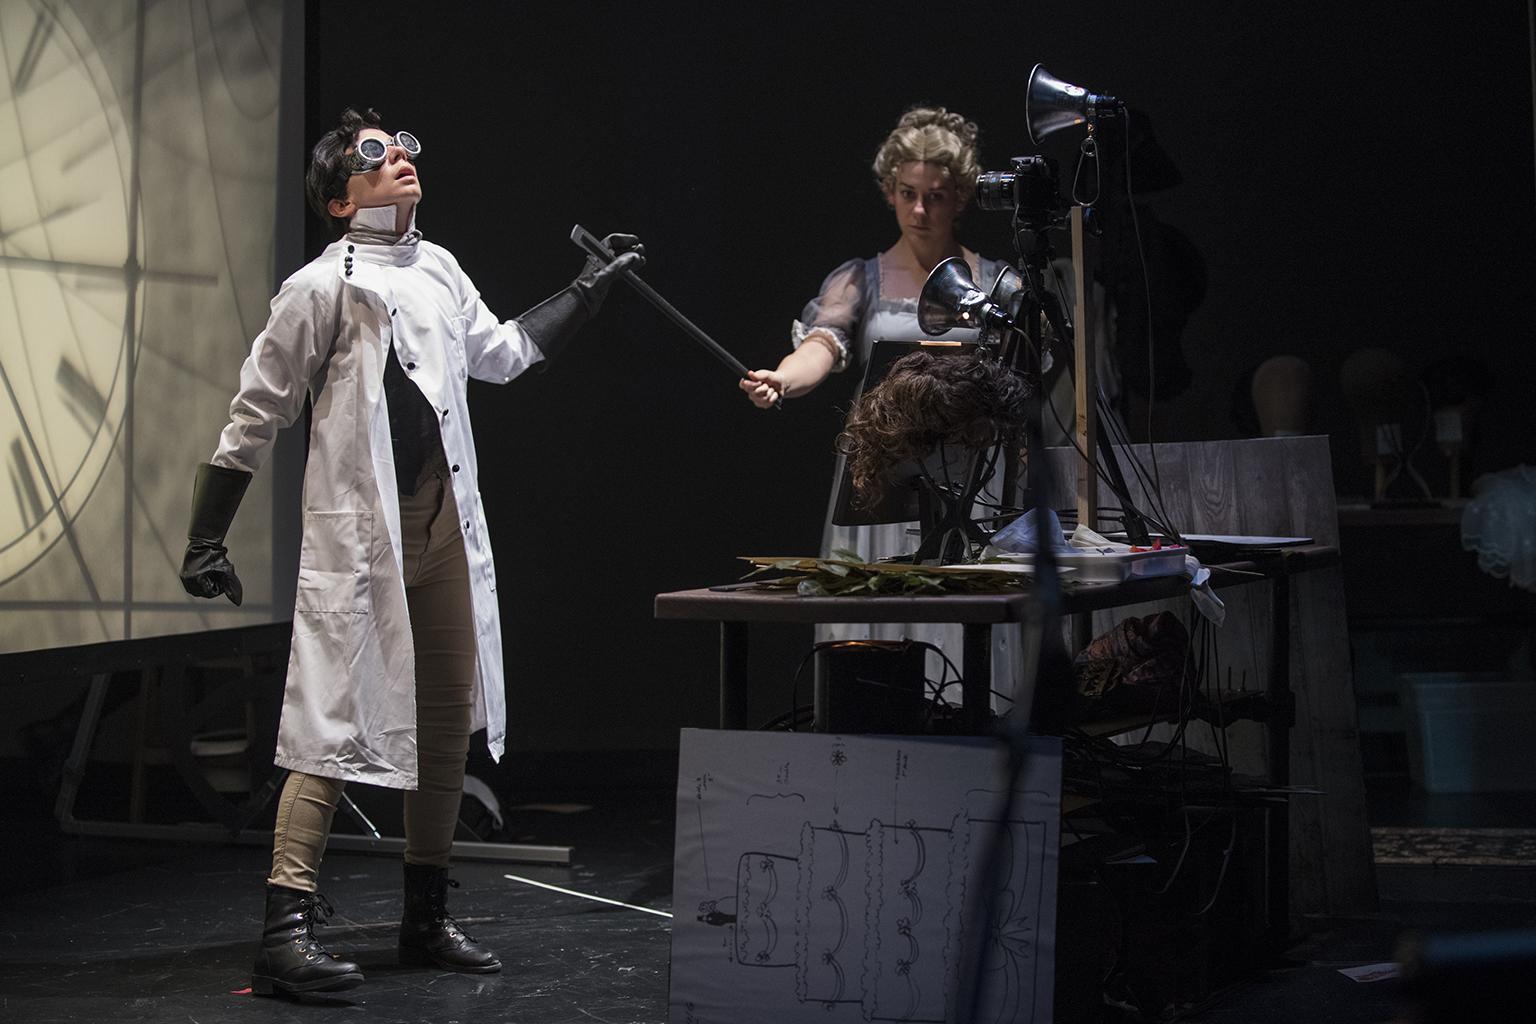 Sarah Fornace, left, and Julia Miller in “Frankenstein” by Manual Cinema at Court Theatre. (Photo by Michael Brosilow)